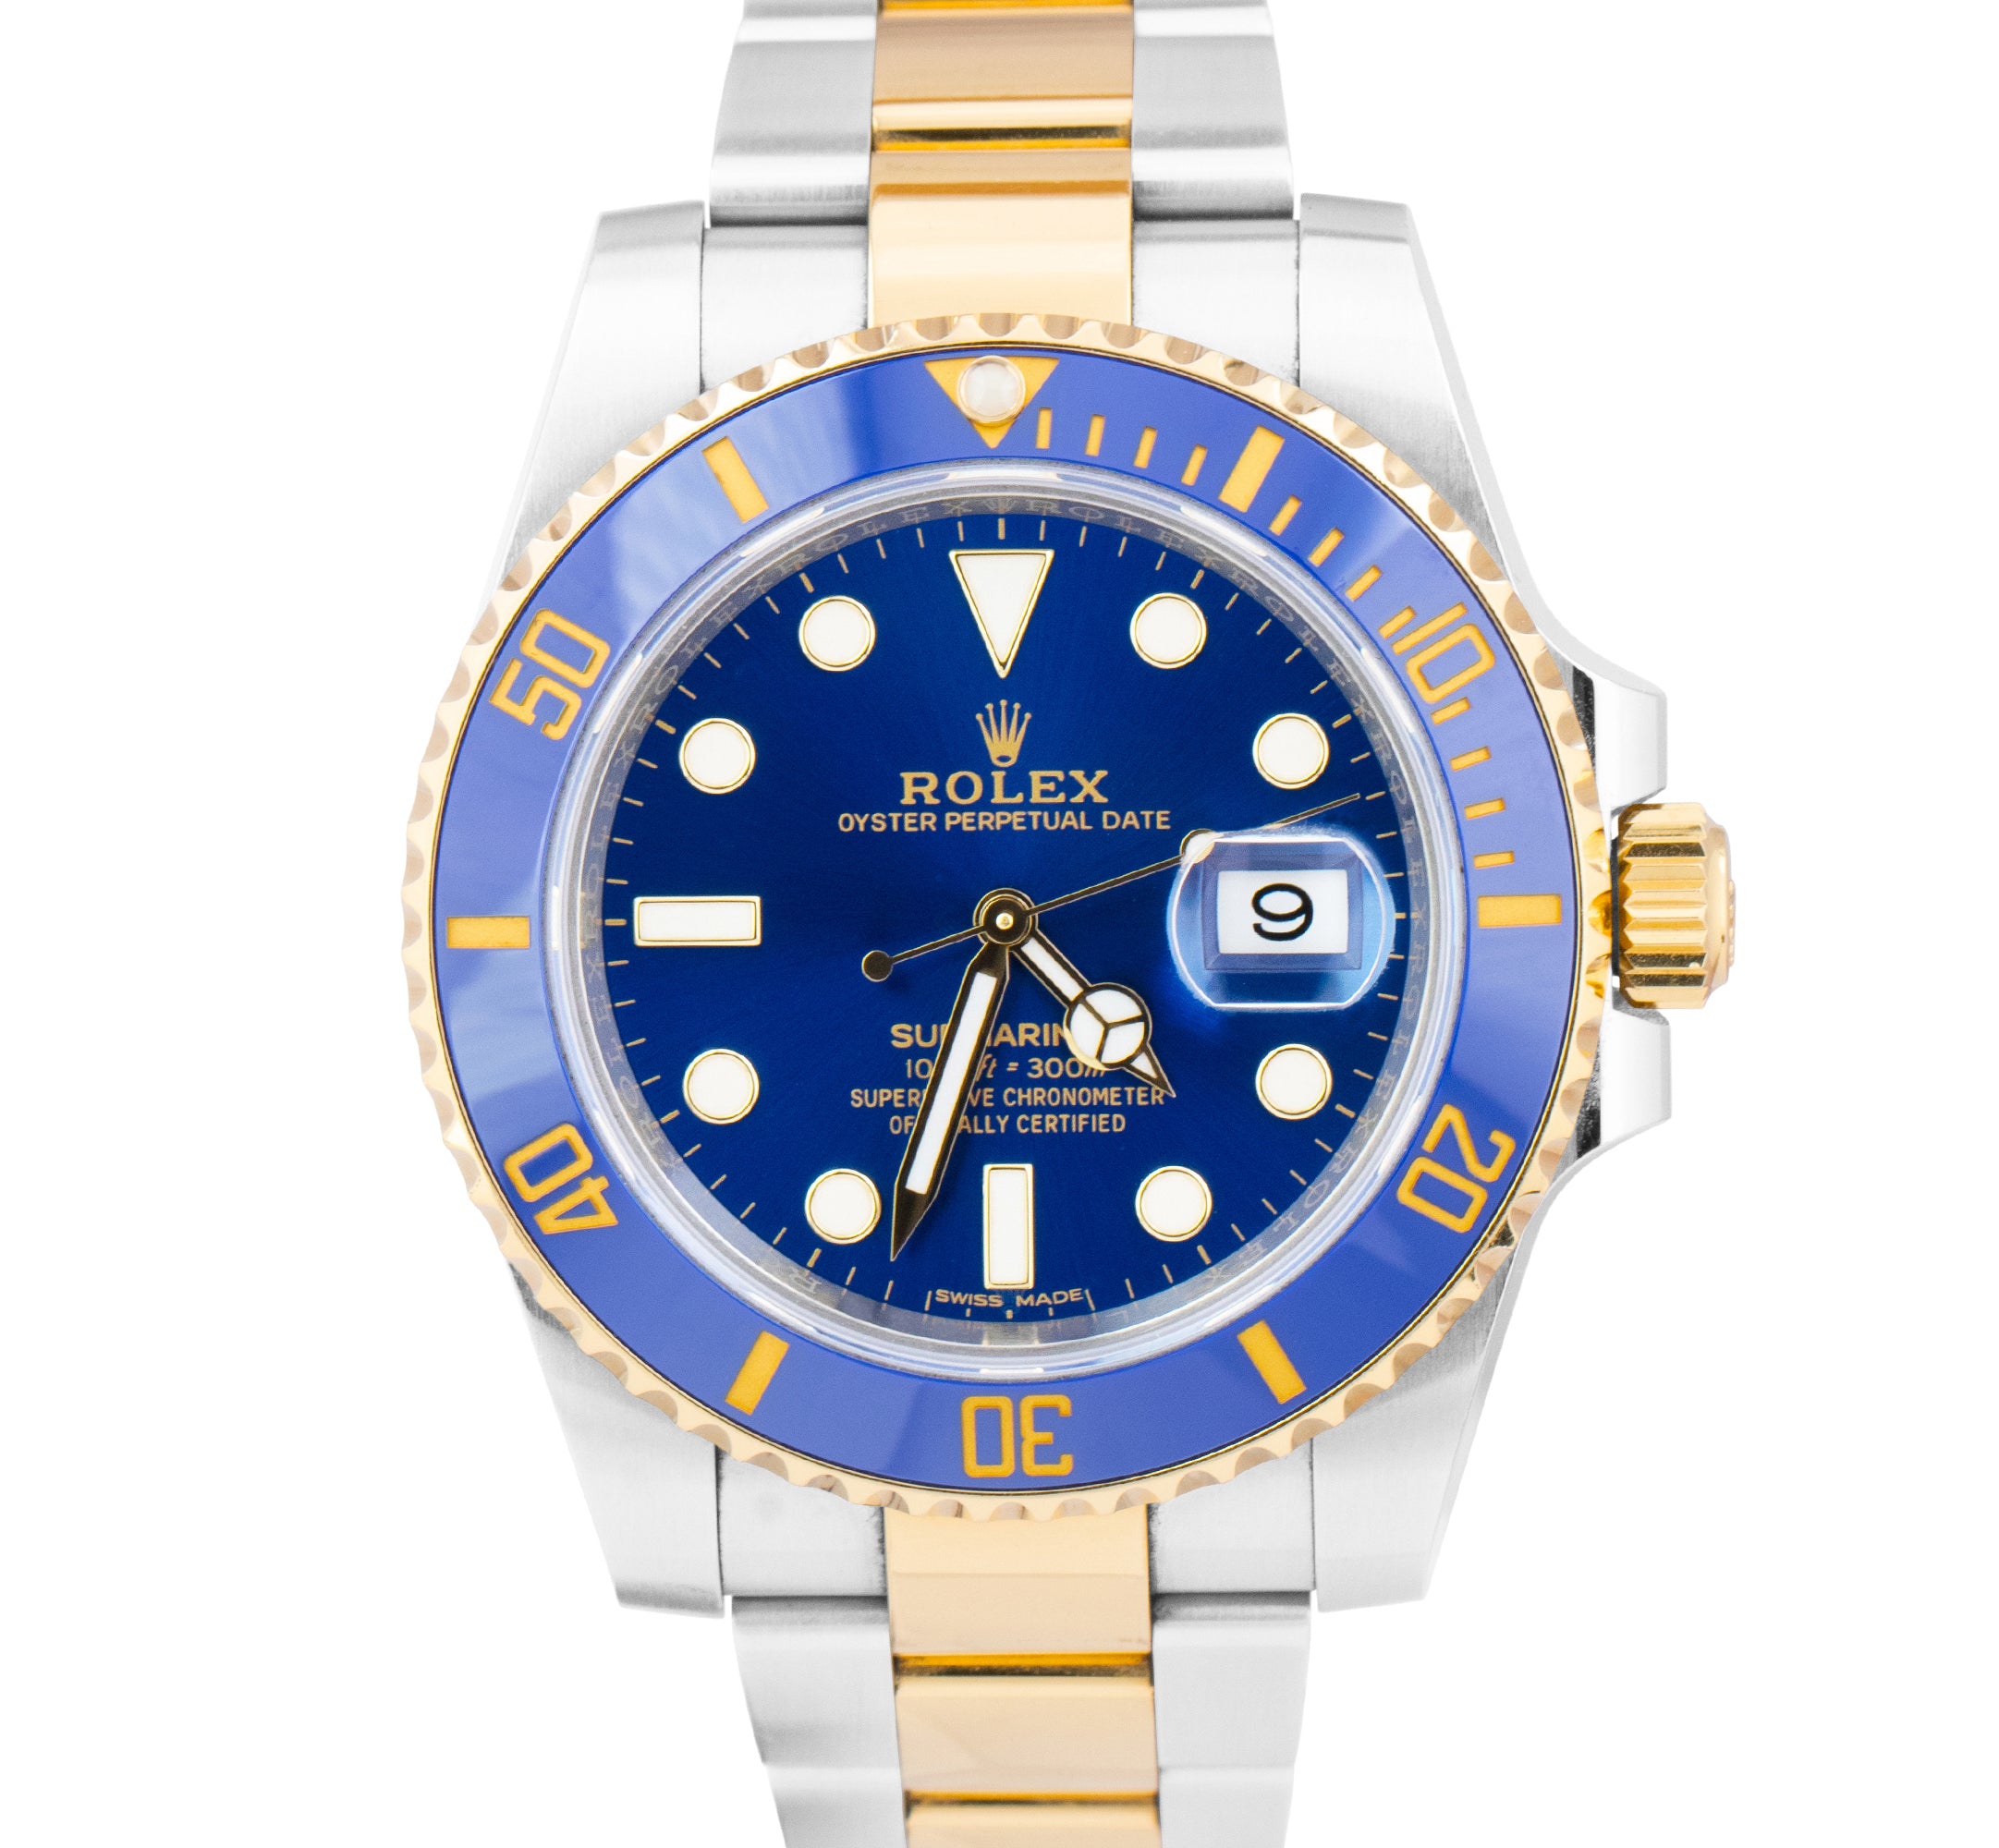 2018 Rolex Submariner Date Ceramic Two-Tone Stainless Gold Blue Watch 116613 LB